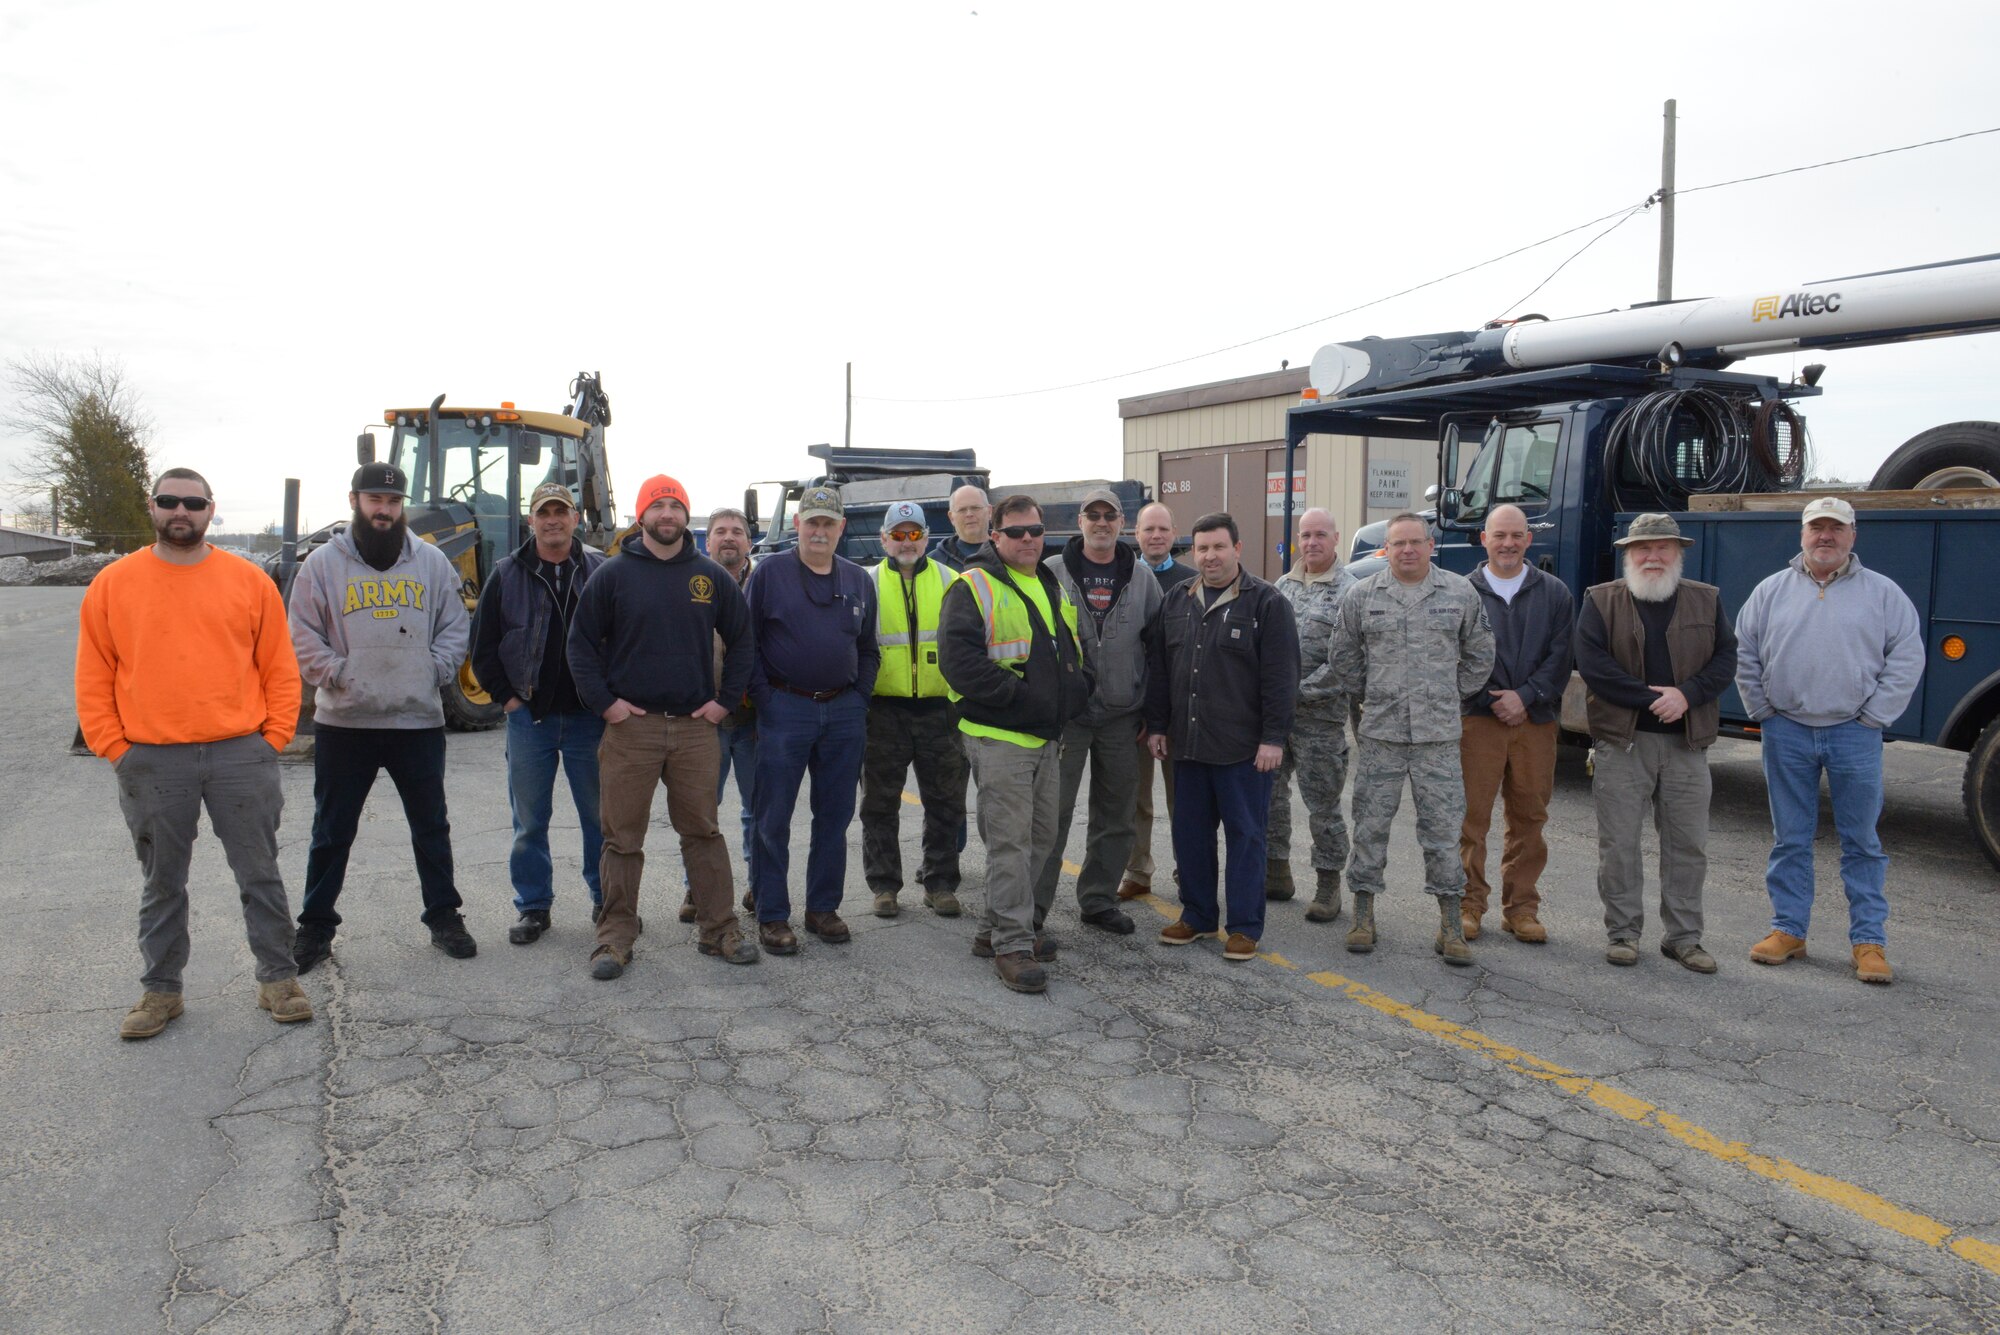 The 102nd Civil Engineers after the winter storms of March 2018 at Otis Air National Guard Base, Mass.